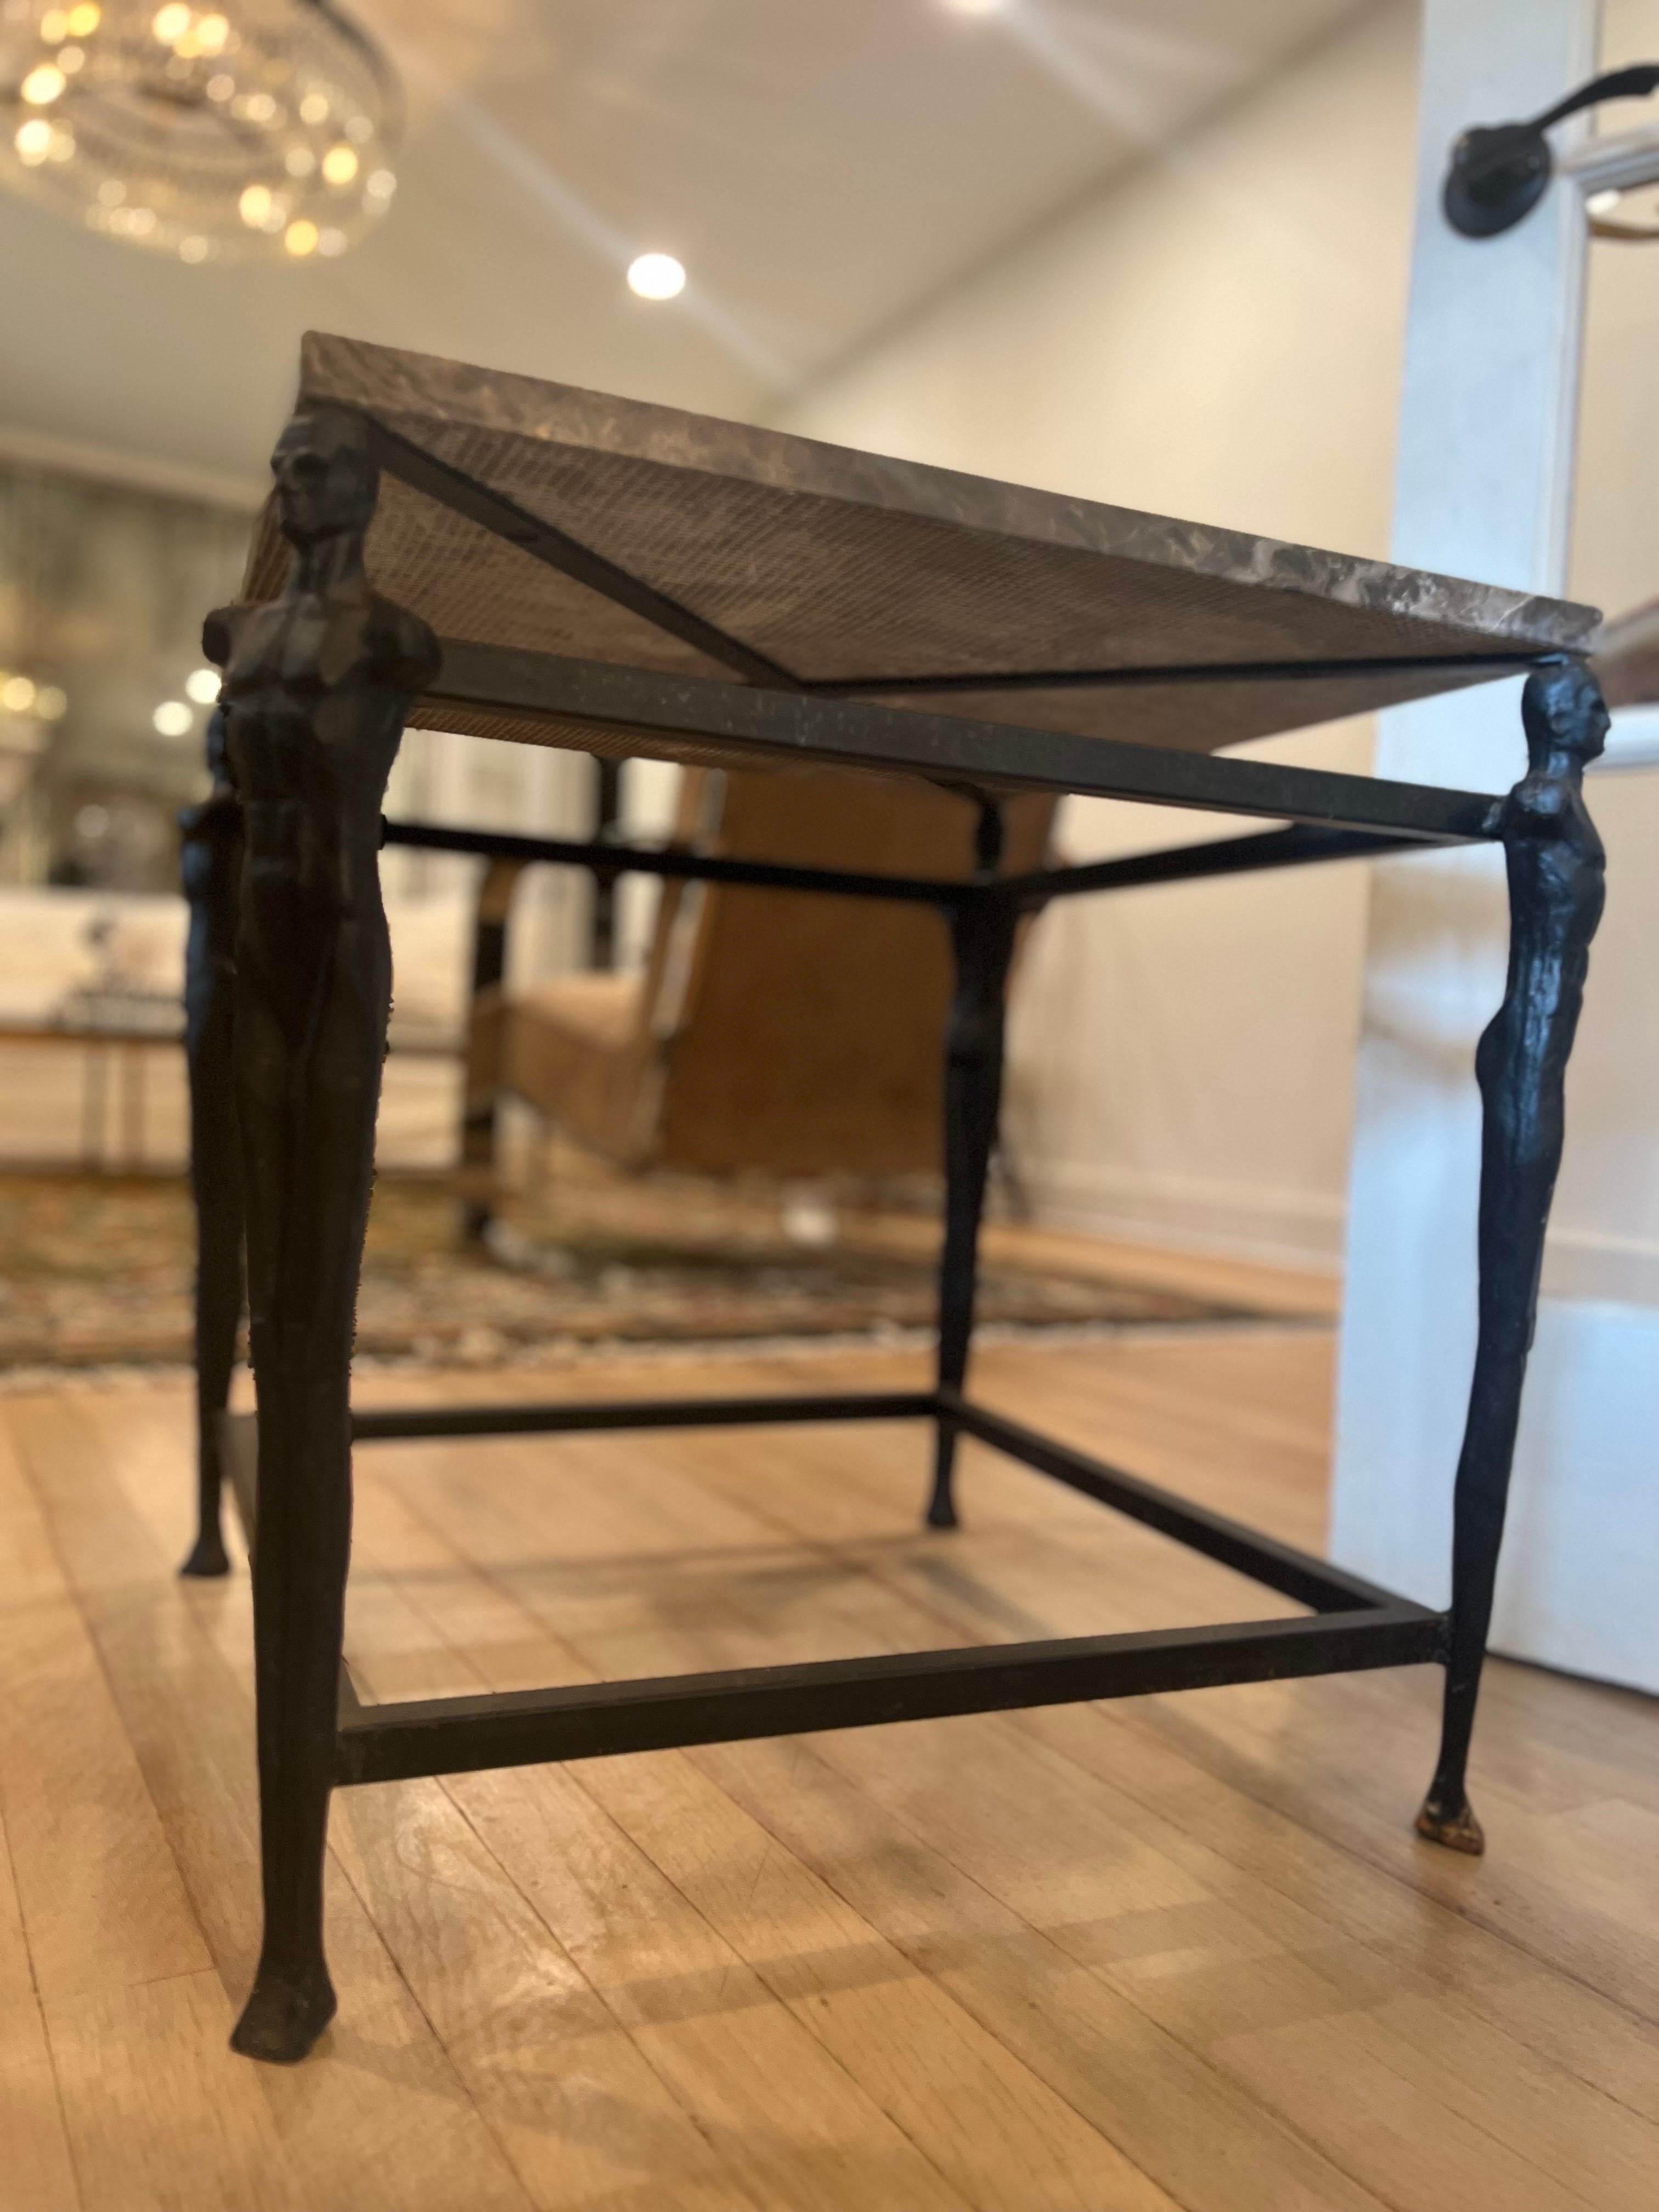 Cast Iron Male Figurative Side Table in Manner of Giacometti - Marble Top In Fair Condition For Sale In Los Angeles, CA